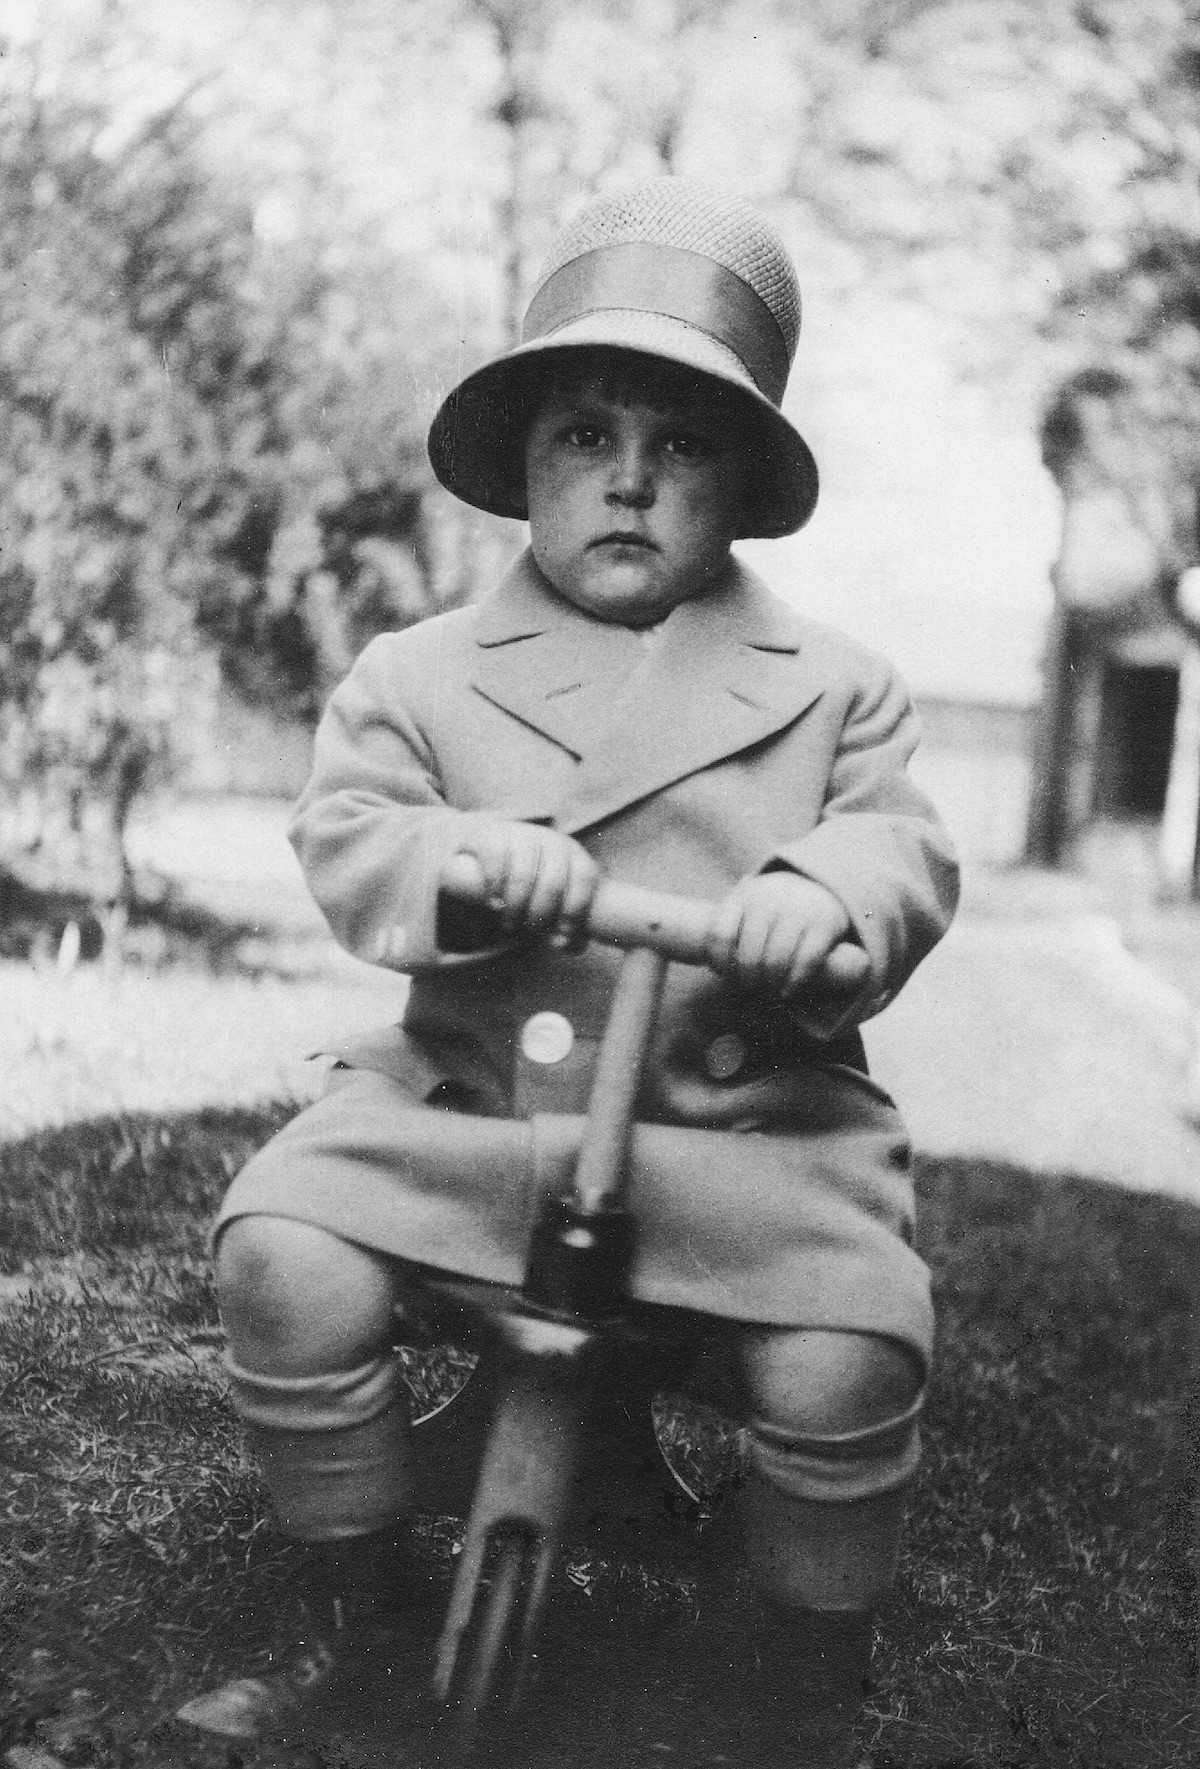 Hawley as a toddler. [Photo] Courtesy of the Michael and Meg Leonard collection